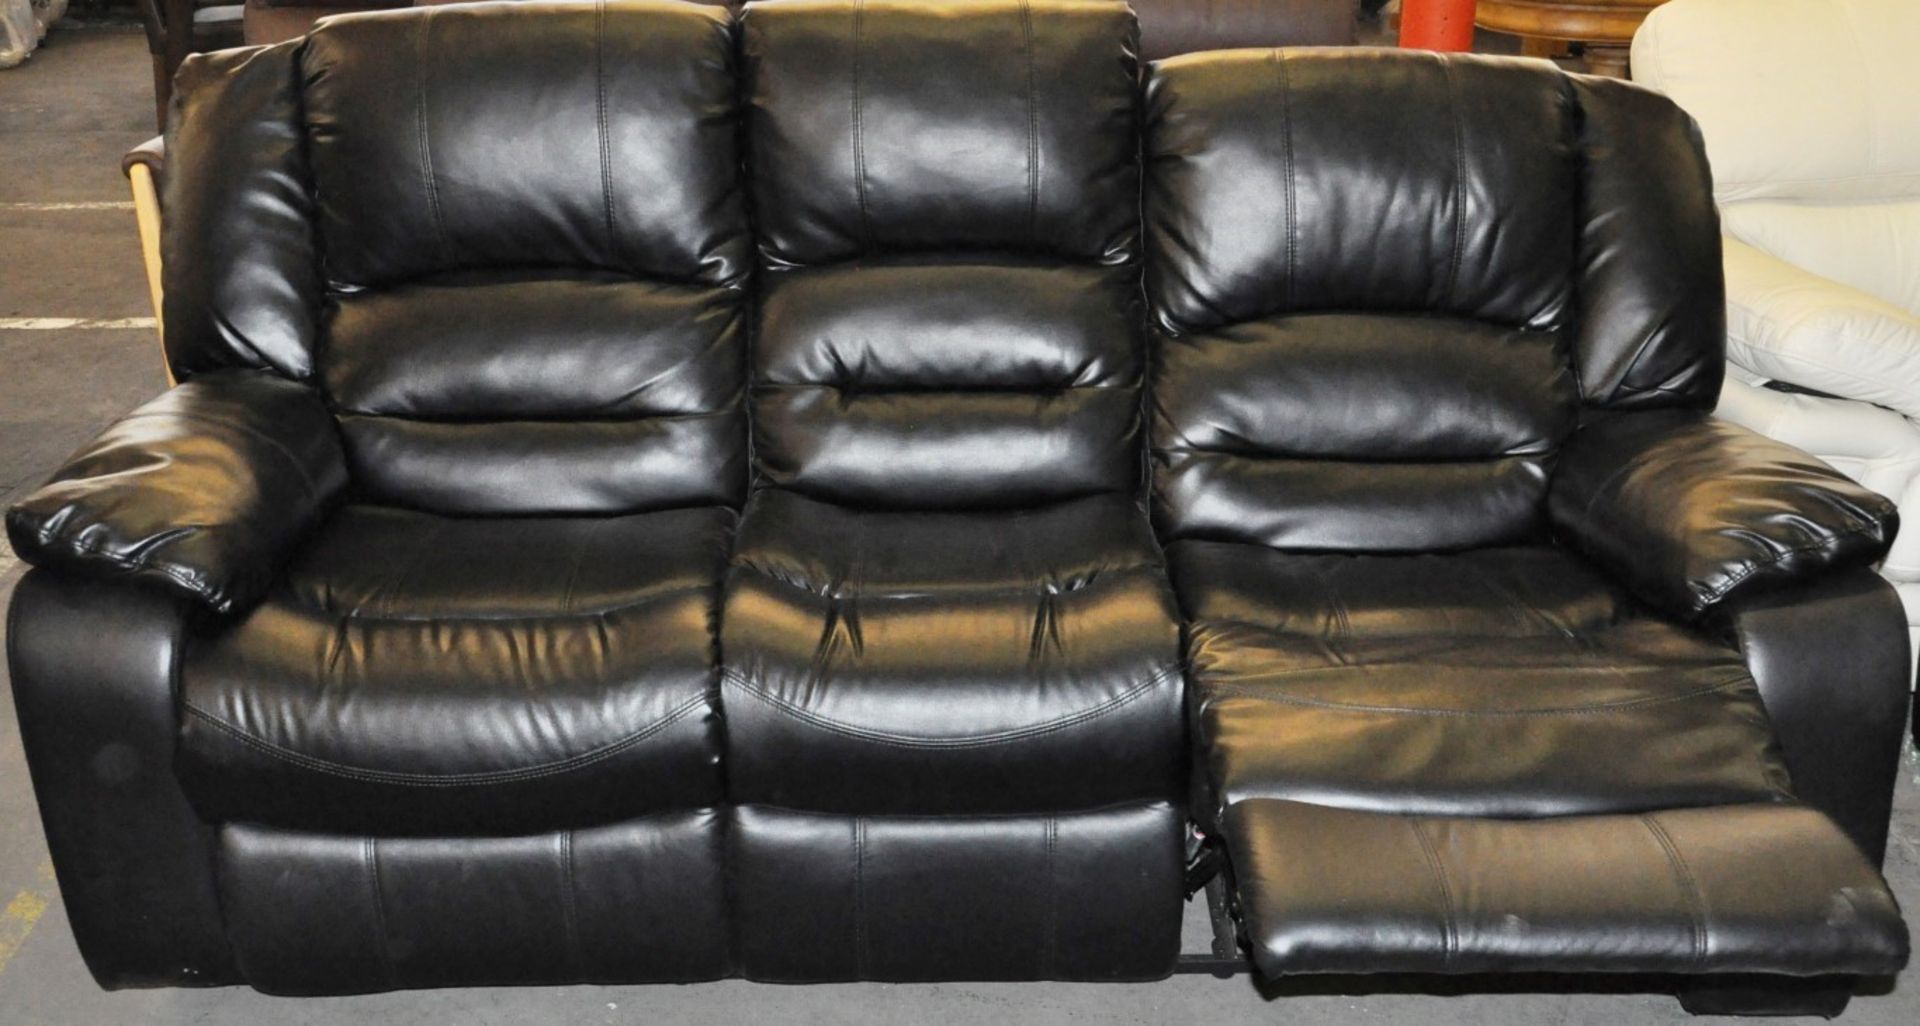 1 x Stylish Black Leather 3 Seater Sofa with Reclining Seat – RRP £1,299.00 - Banded Leather - Image 3 of 7